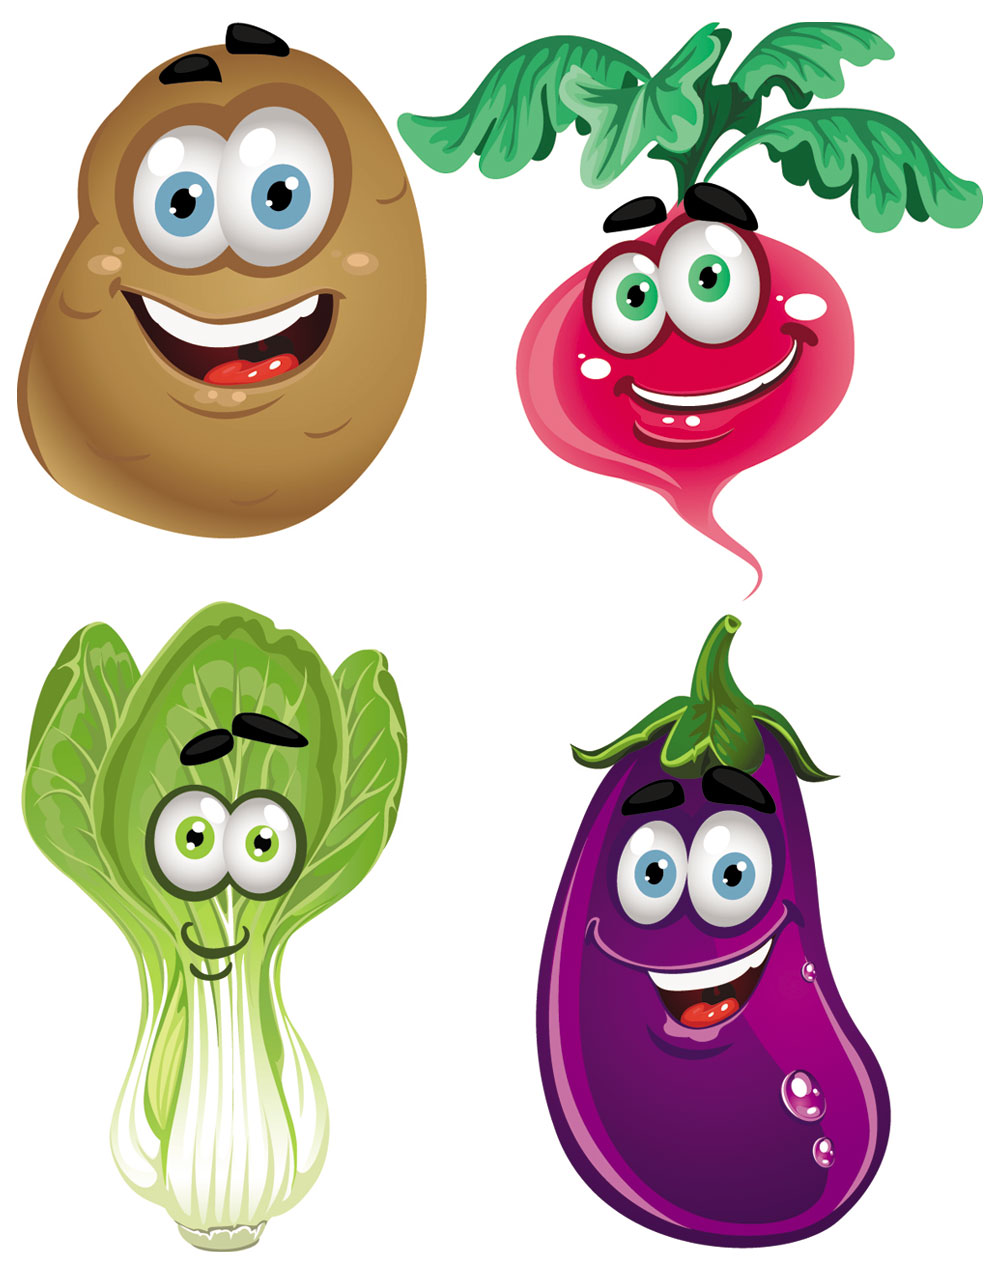 Free Animated Vegetables Cliparts, Download Free Clip Art